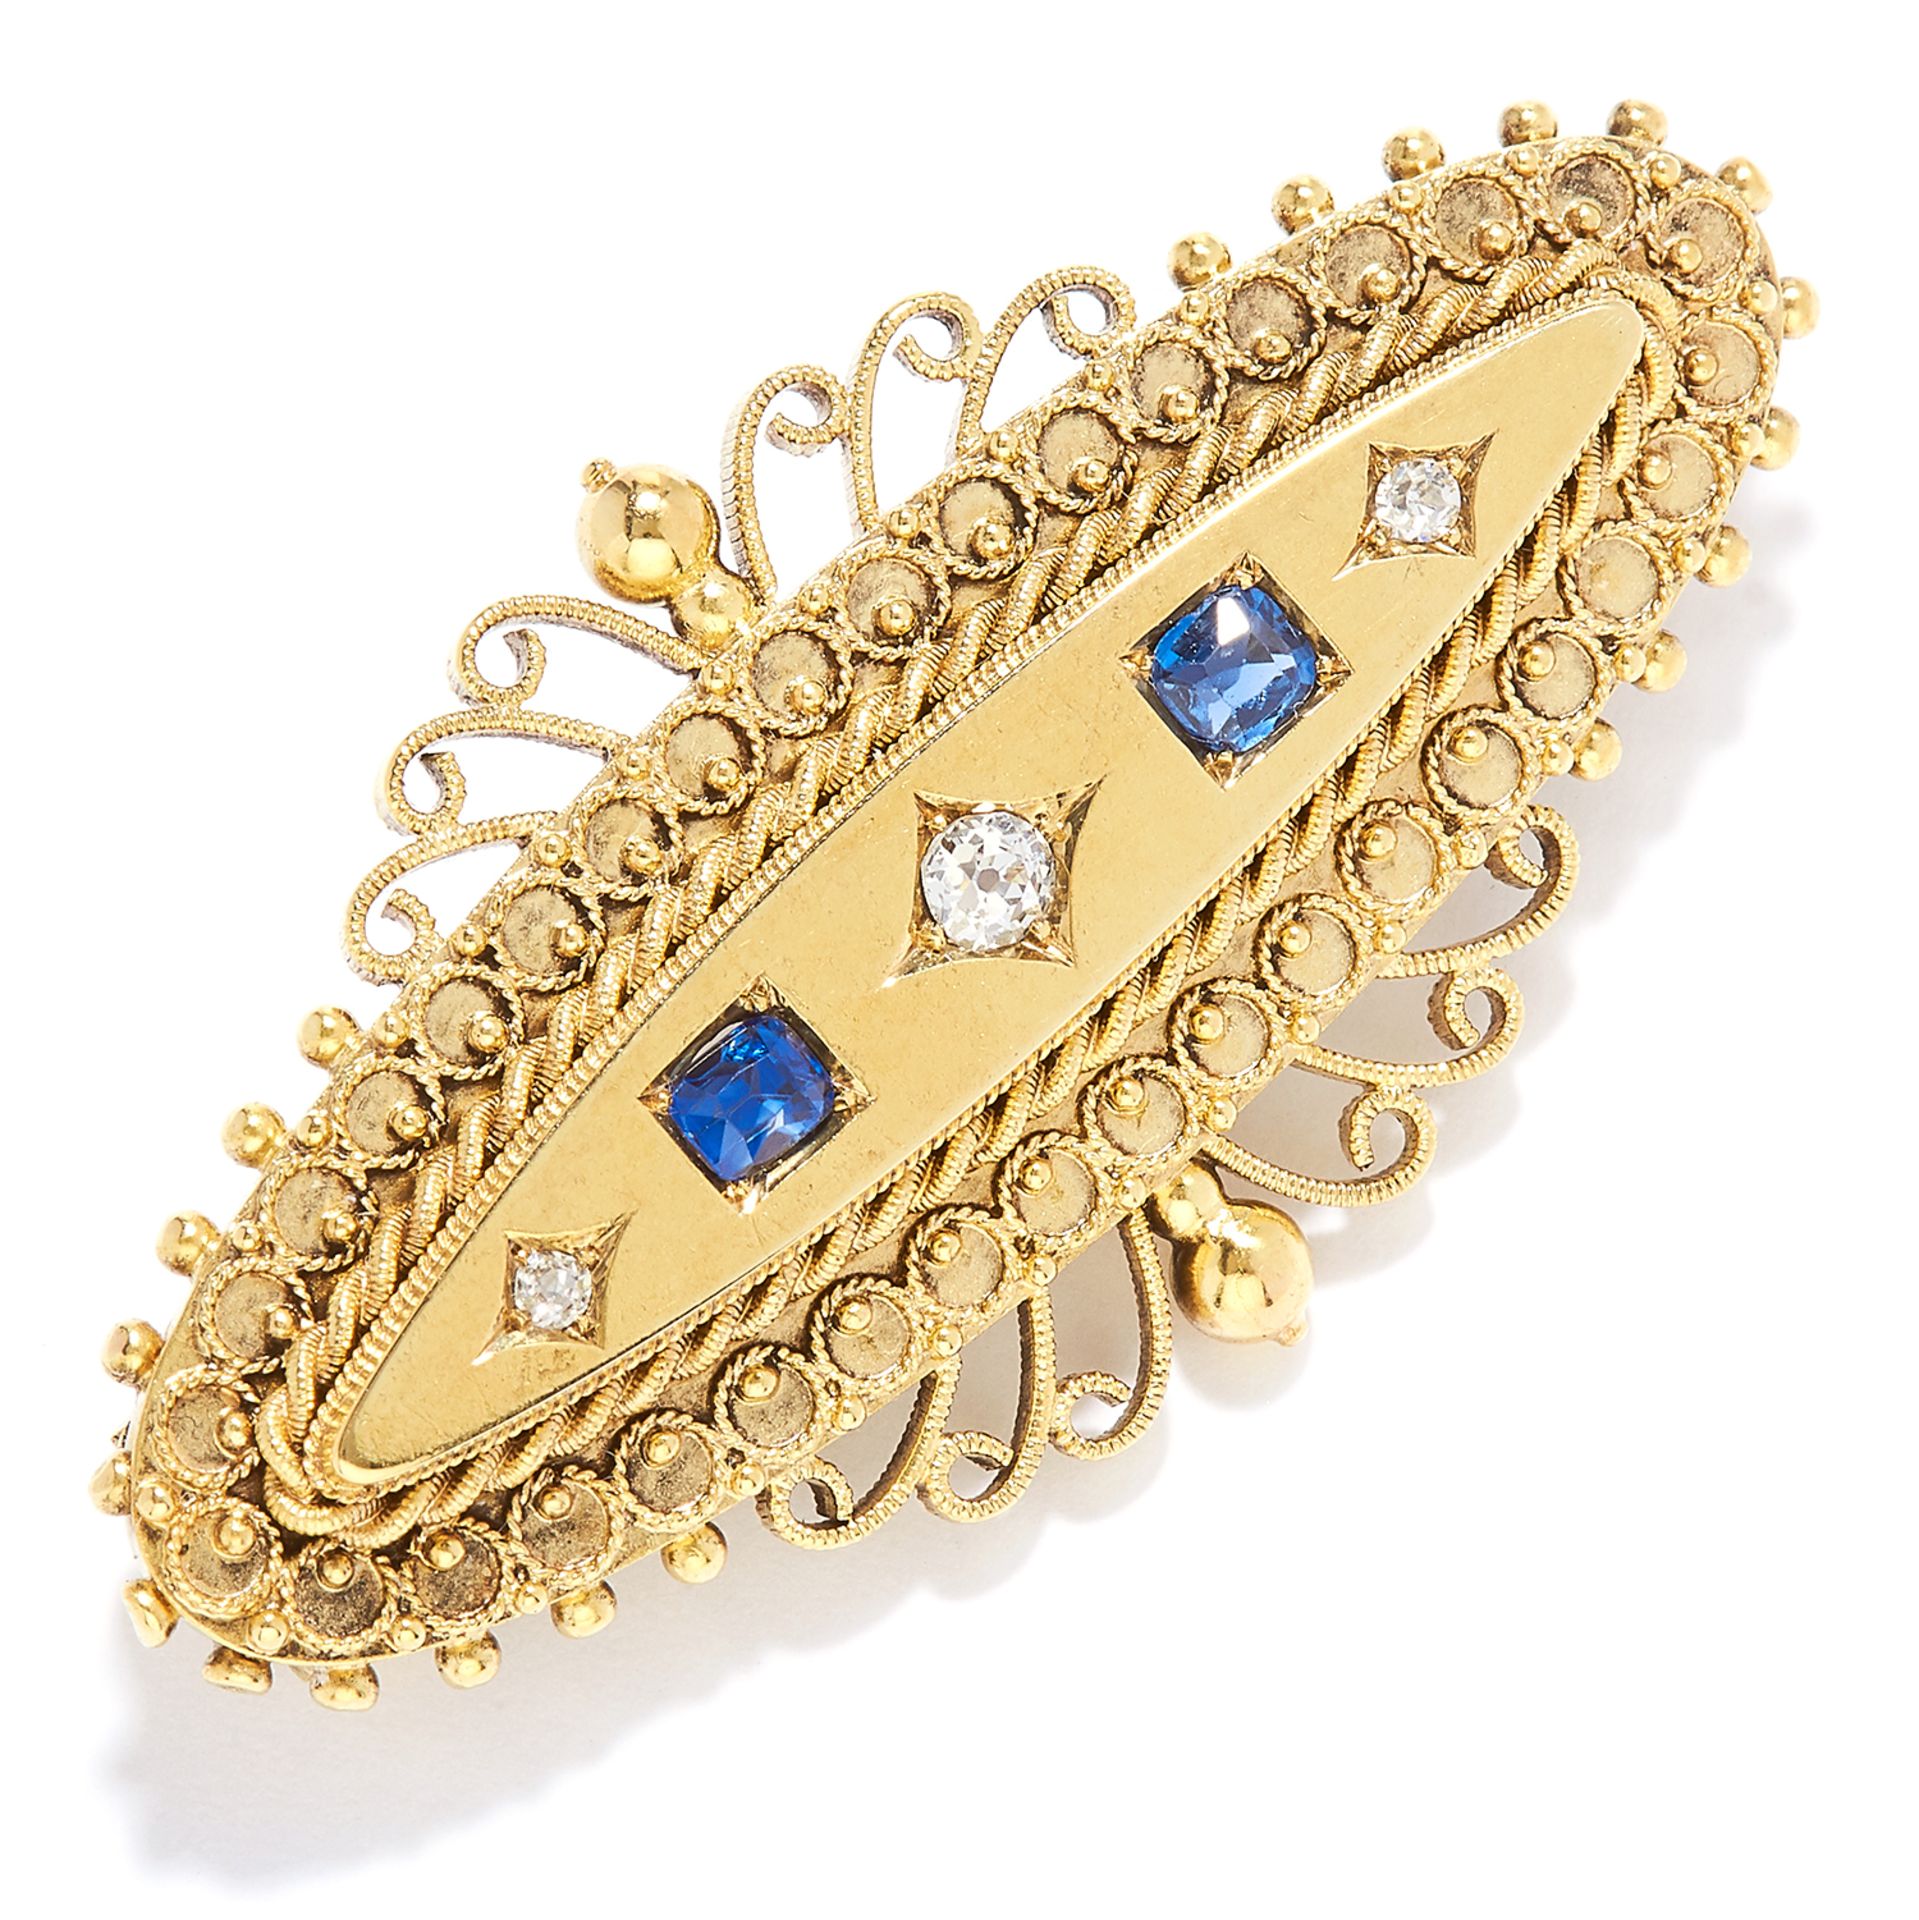 ANTIQUE SAPPHIRE AND DIAMOND BROOCH in high carat yellow gold, set with alternating old cut diamonds